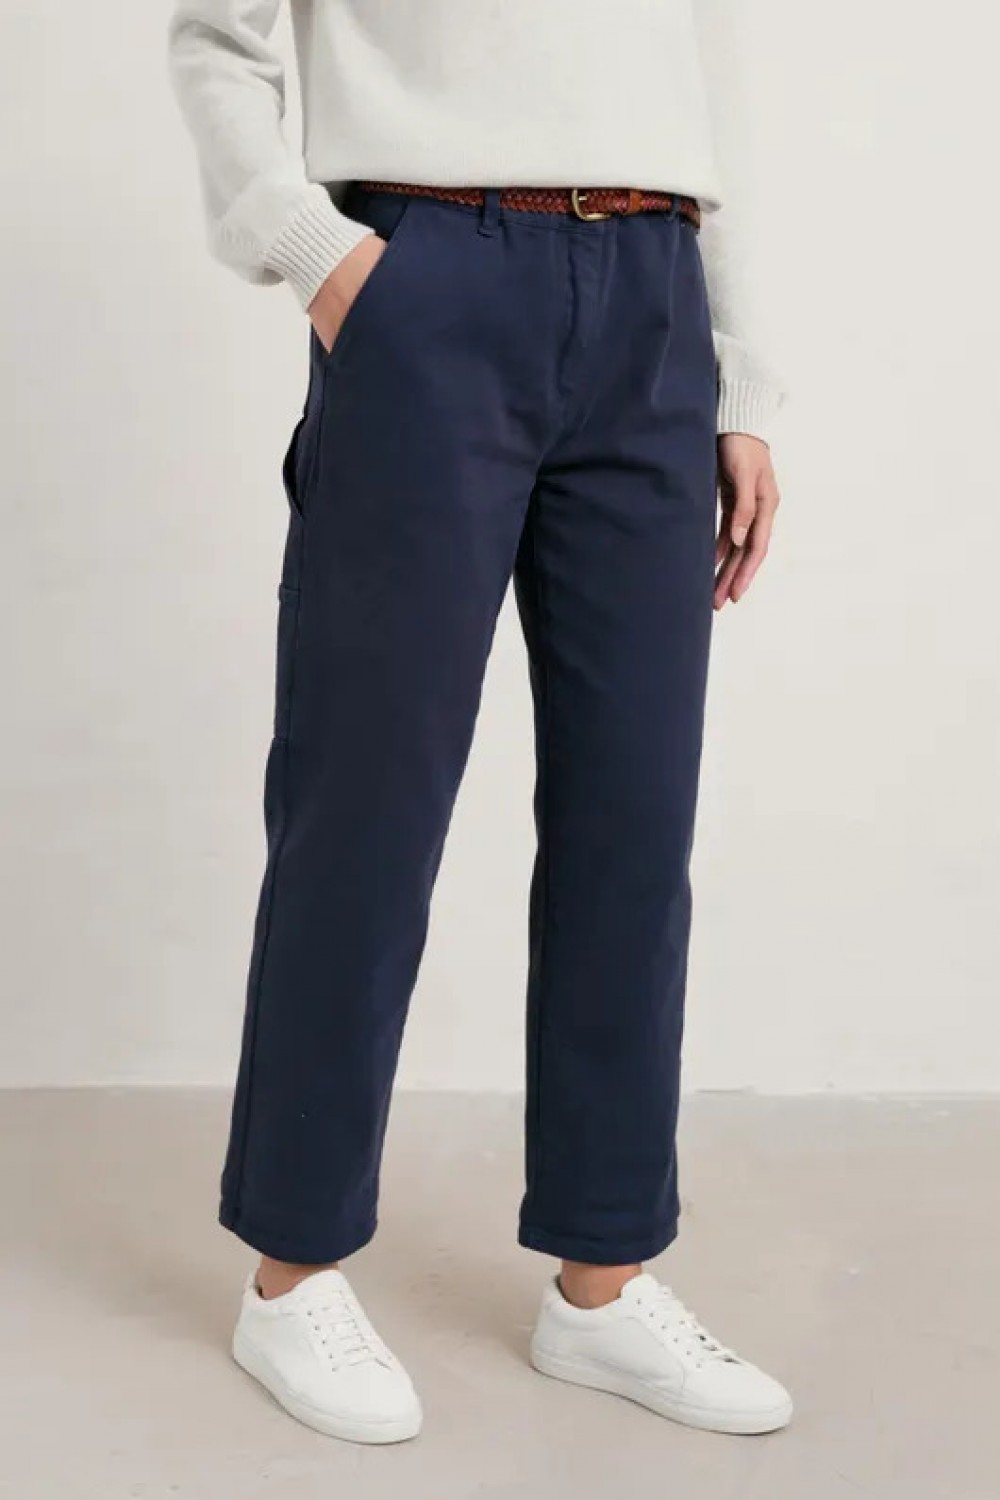 Seasalt Clothing Cliff Picnic Trousers Maritime